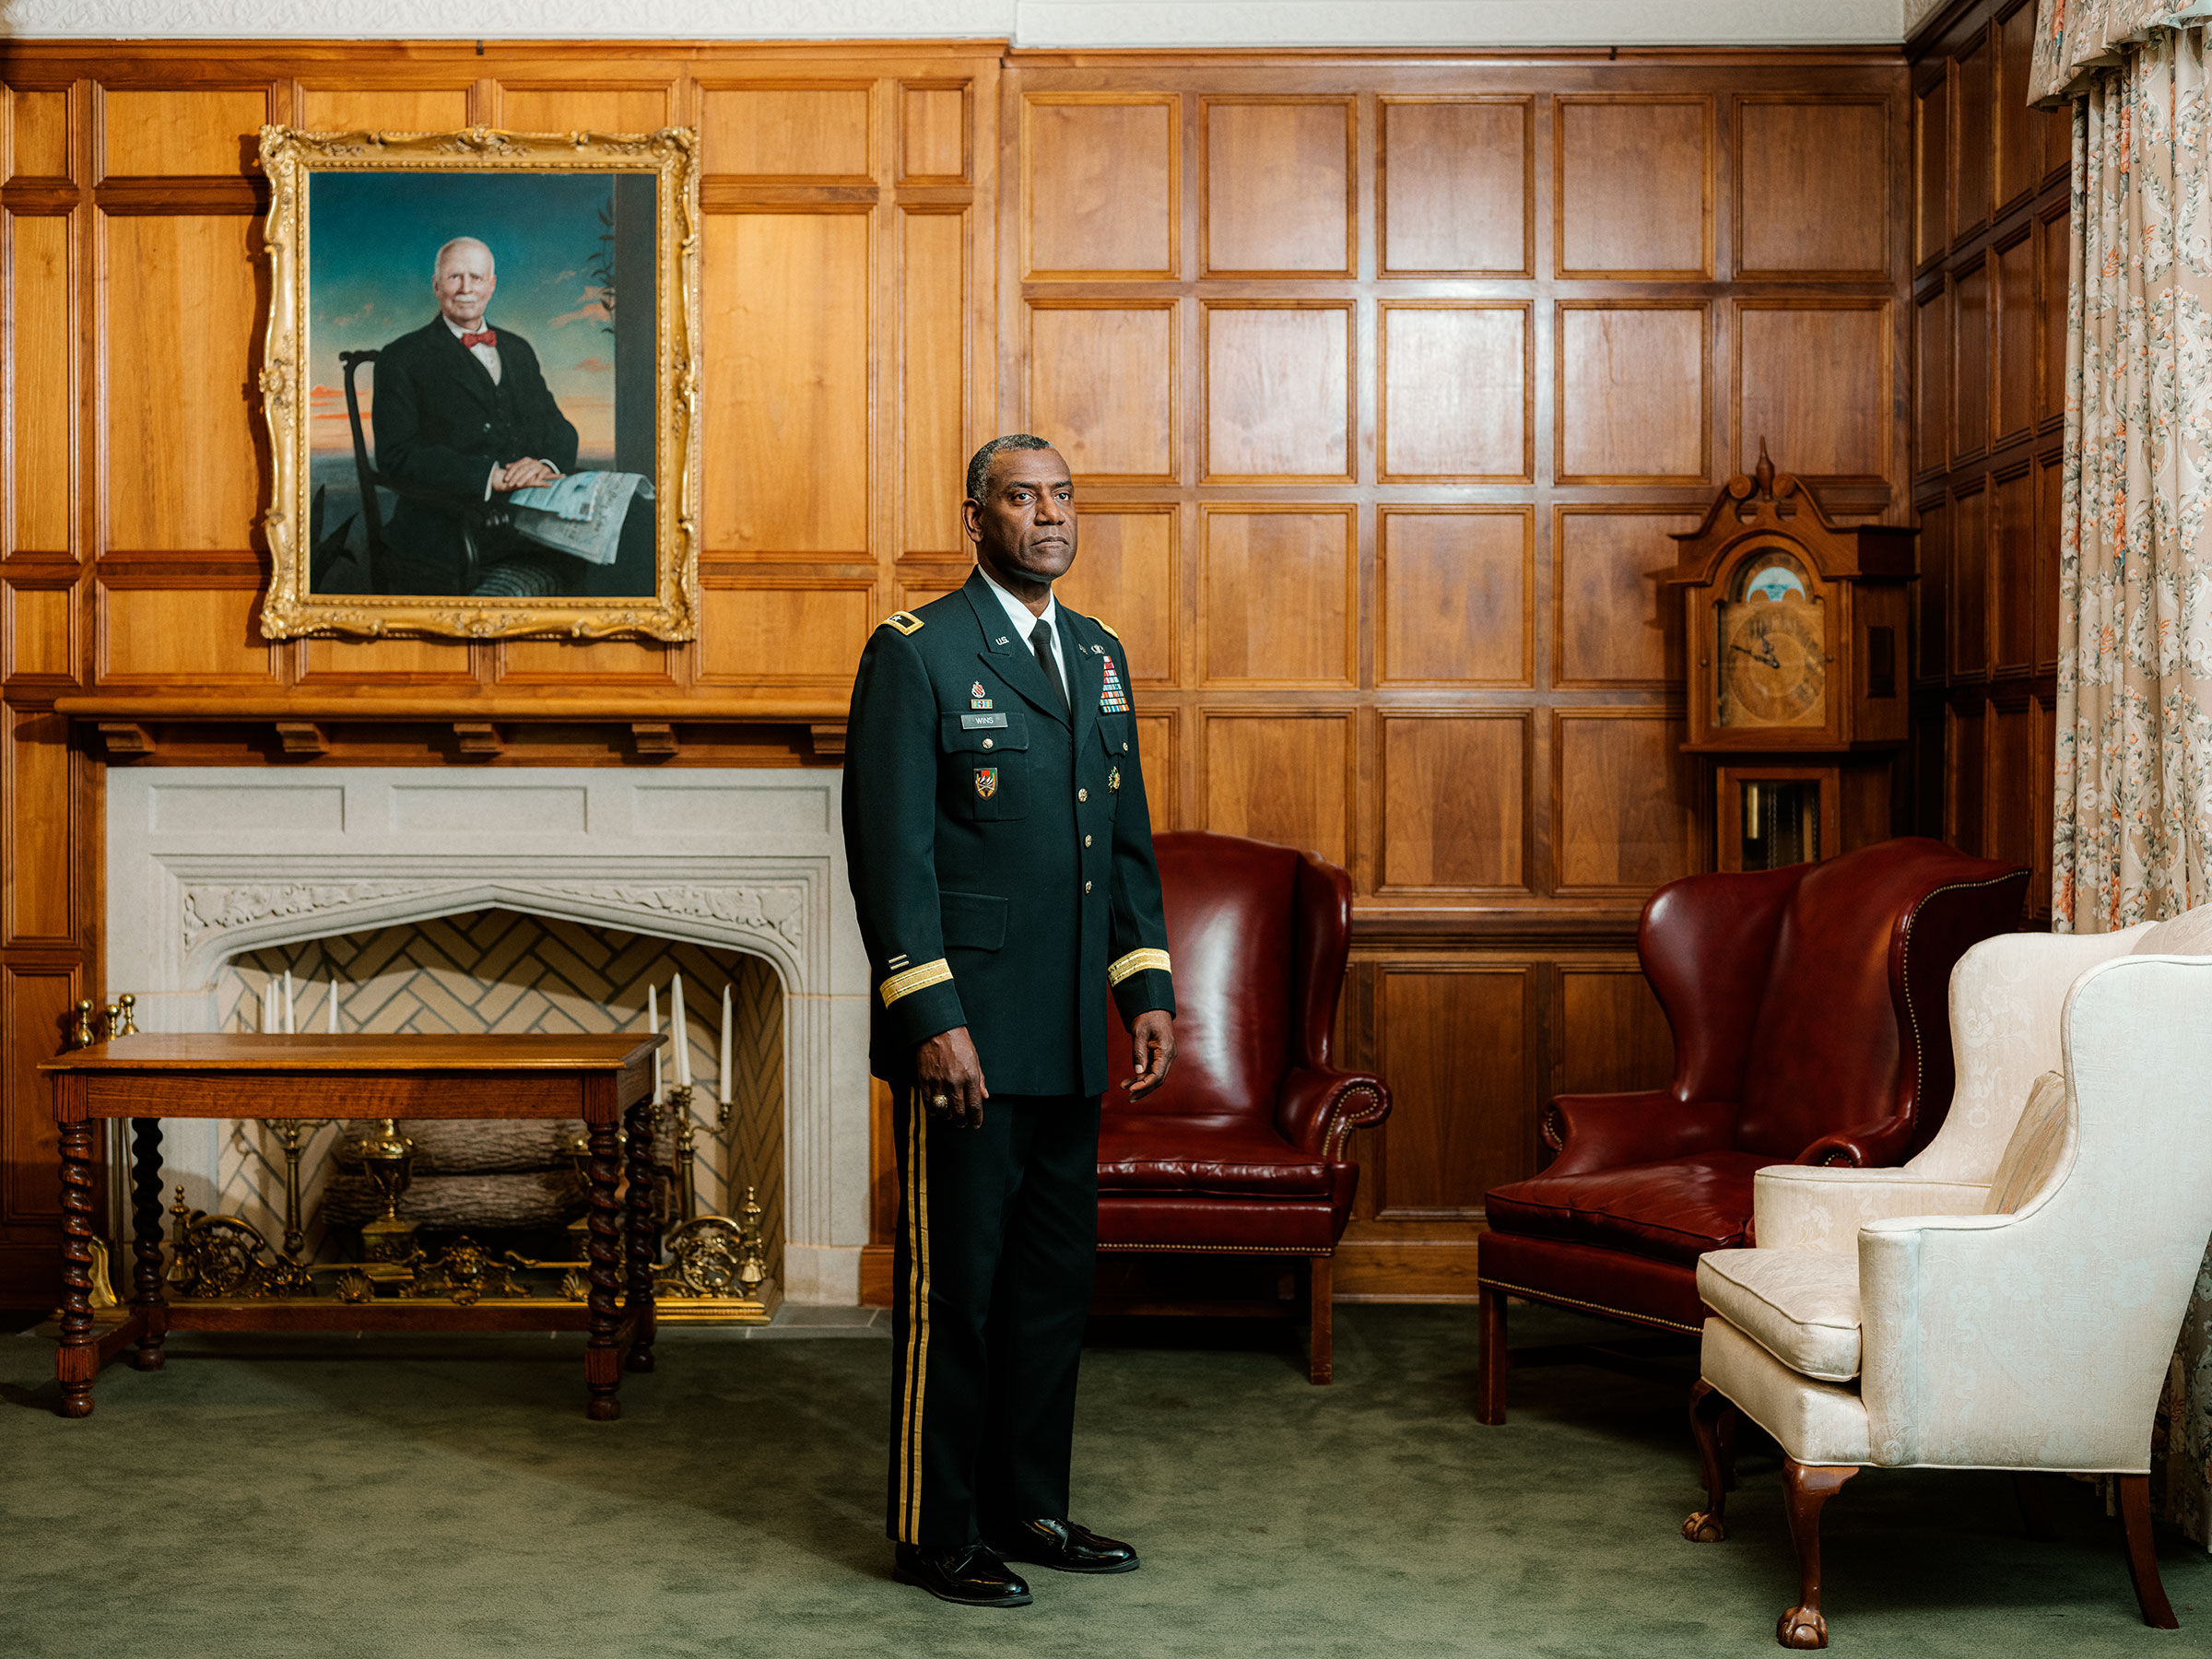 Major General Cedric Wins, class of 1985, was named superintendent in April, the first Black man in the position. (Jared Soares for TIME)